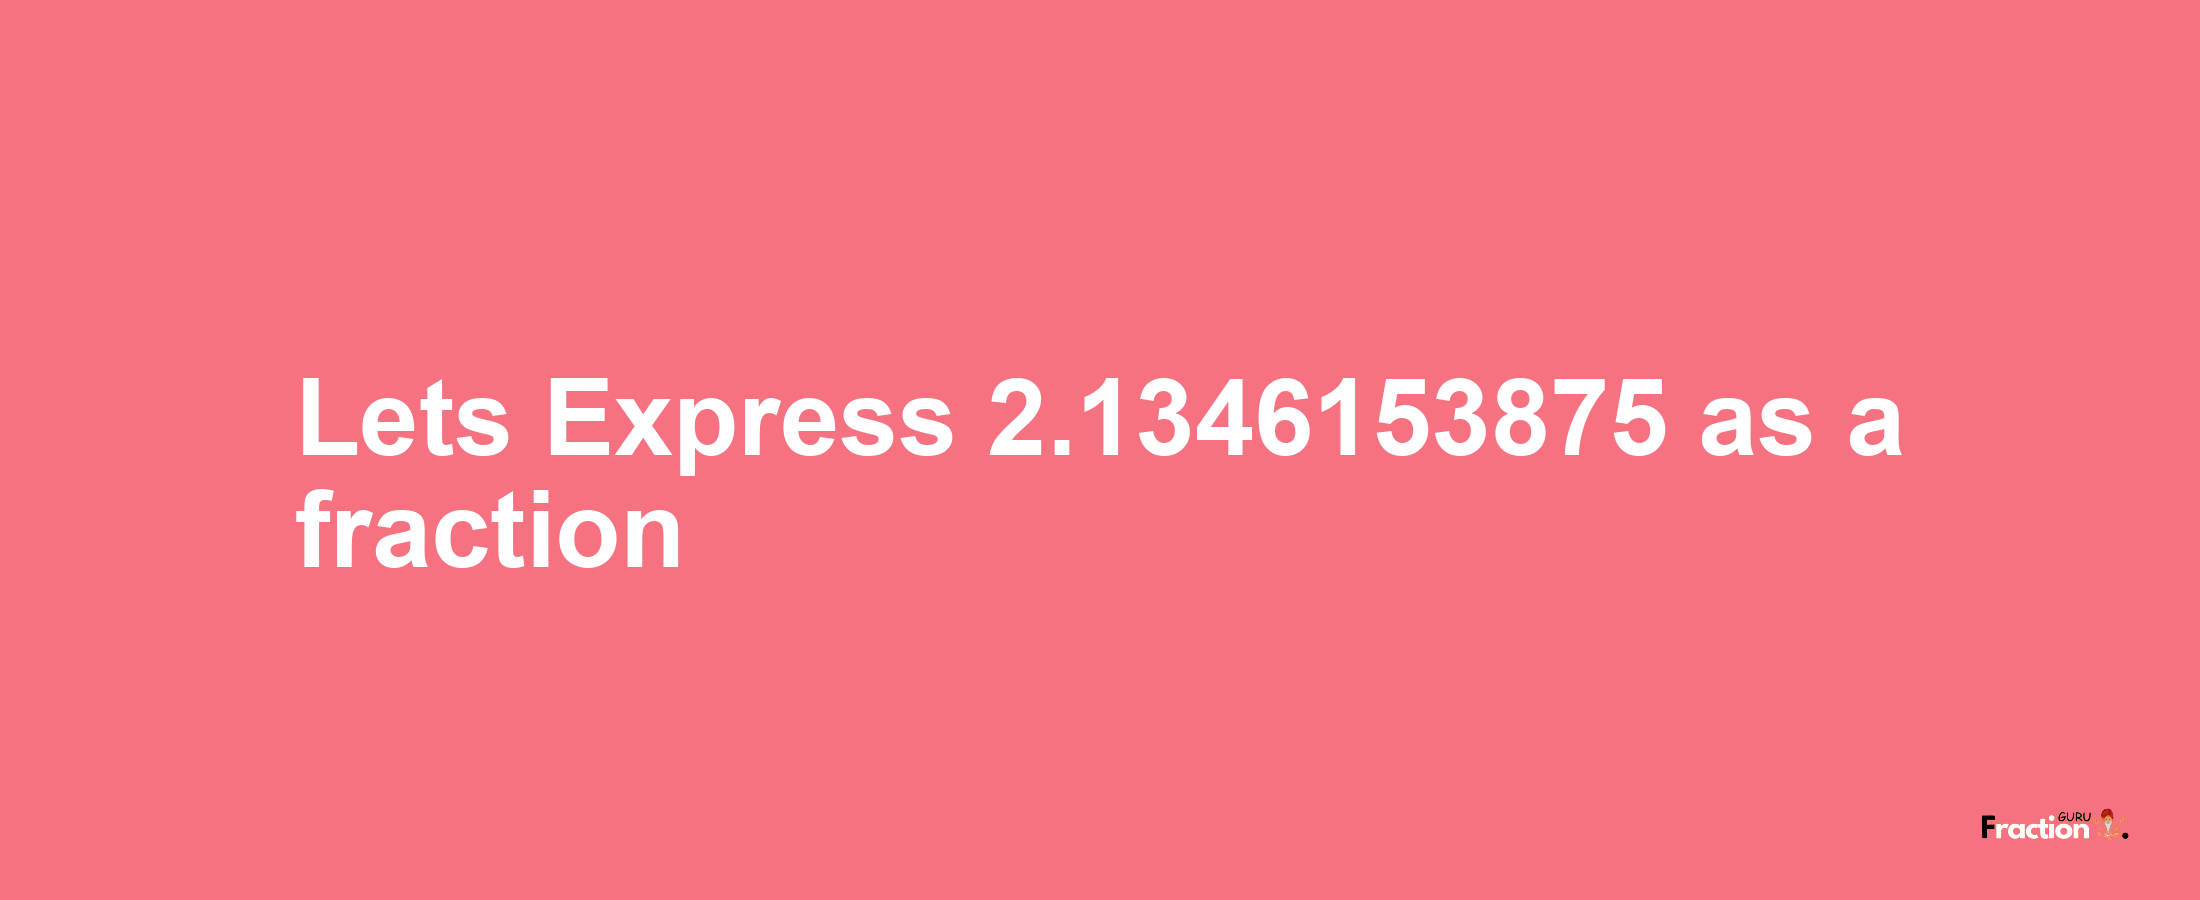 Lets Express 2.1346153875 as afraction